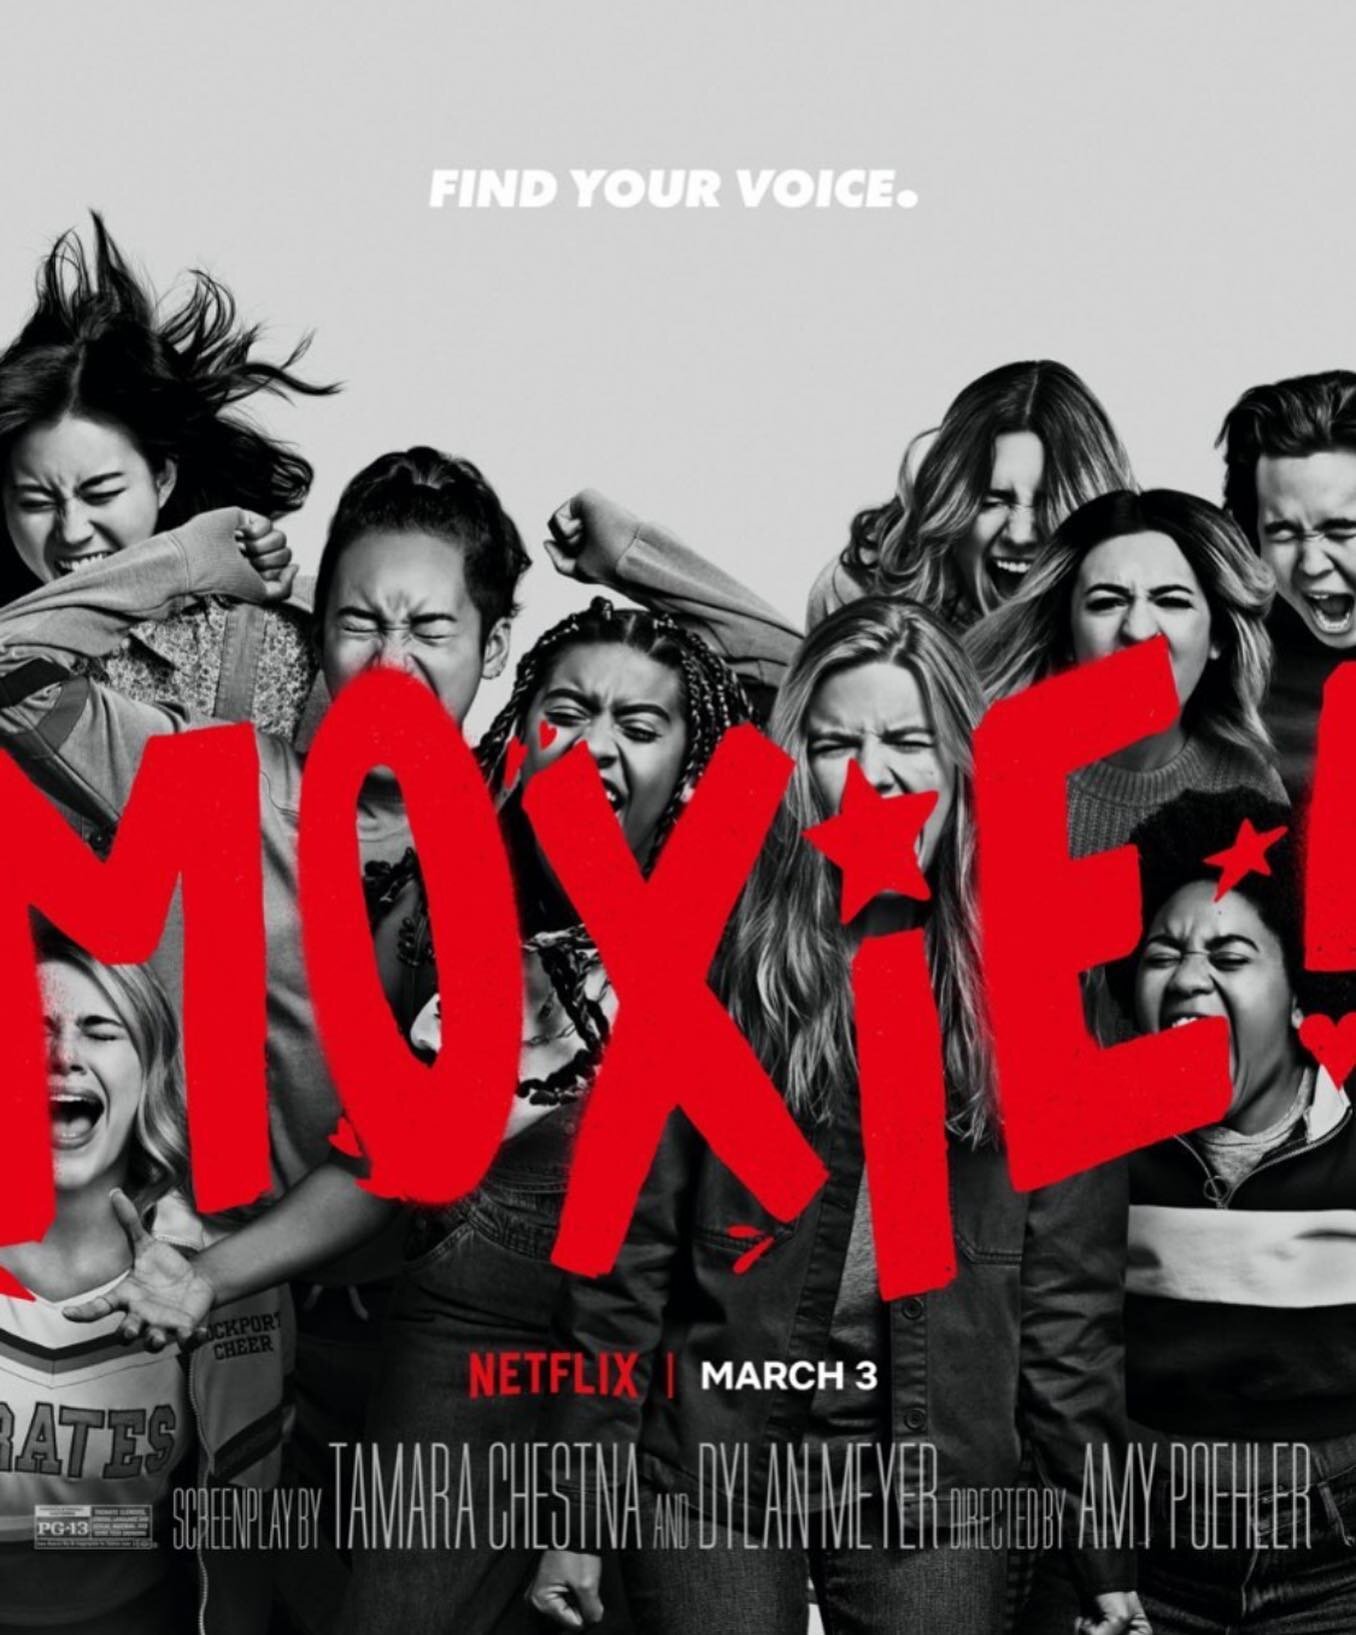 the trailer for the elusive new Amy Poehler directed Netflix film MOXIE! has been released! the plot seems to center around a contemporary high school student&rsquo;s rediscovery of her mother&rsquo;s (Poehler) RIOT GRRRL past. Recognizing the parall